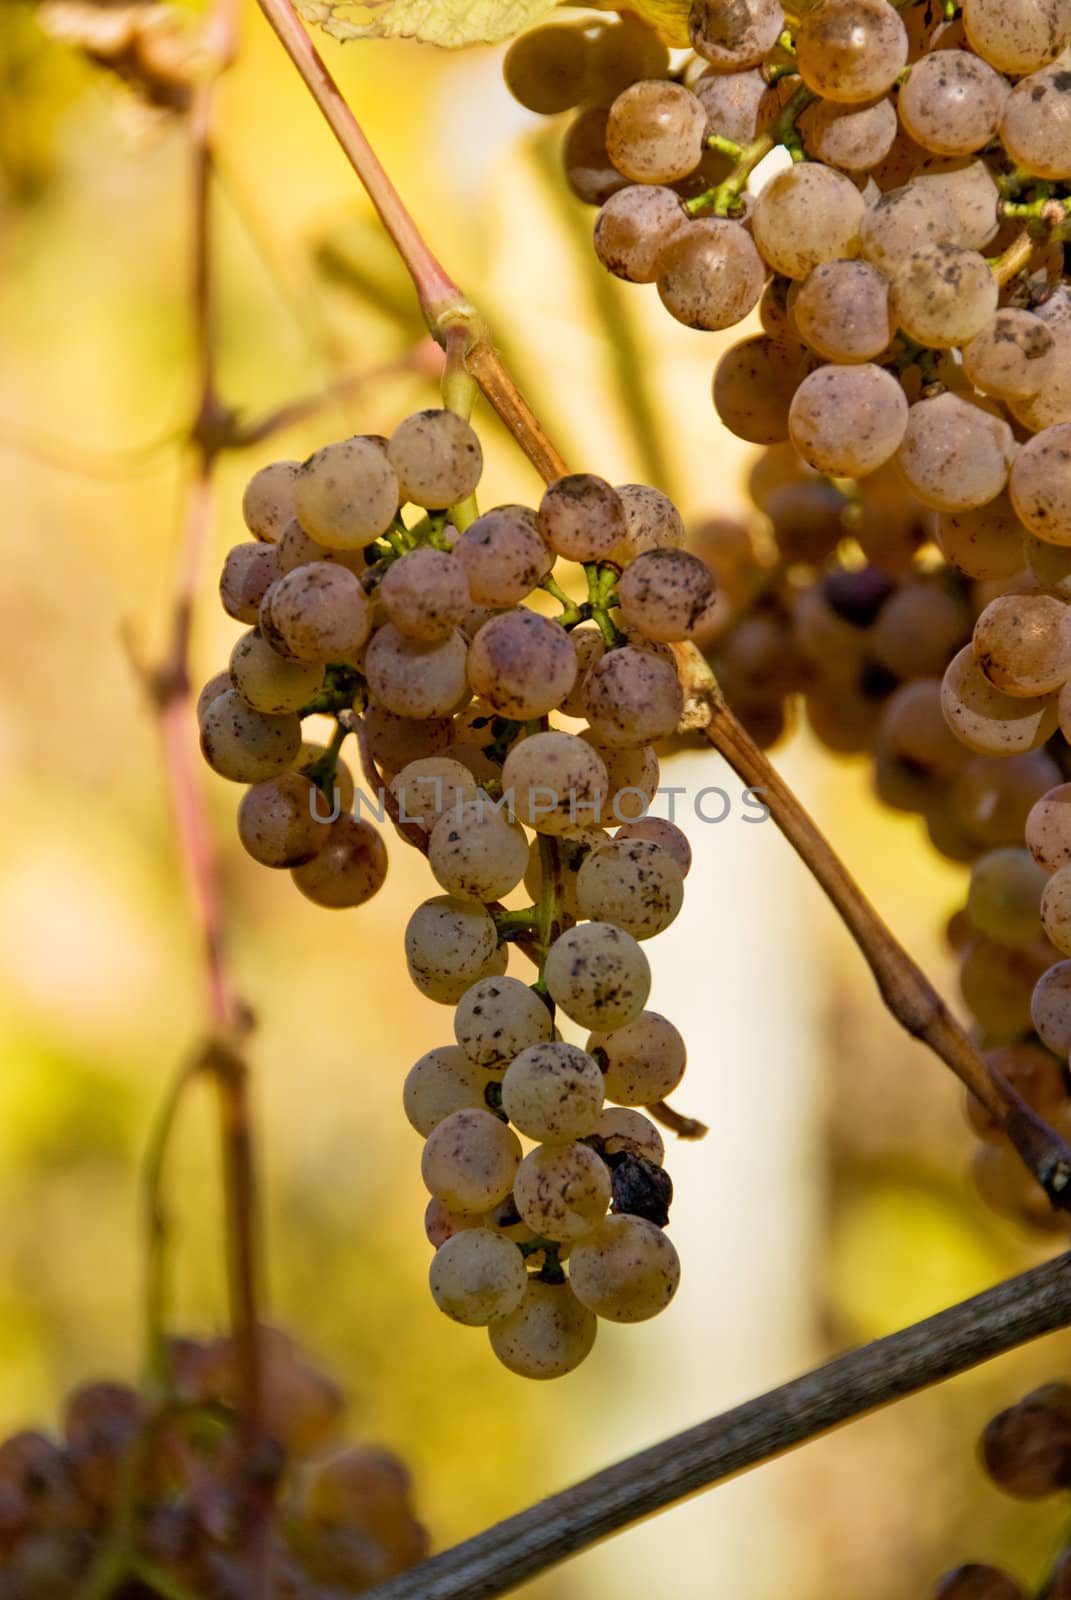 Gros Manseng and Petit Manseng grapes are grown for Jurancon wine in Southwest France.